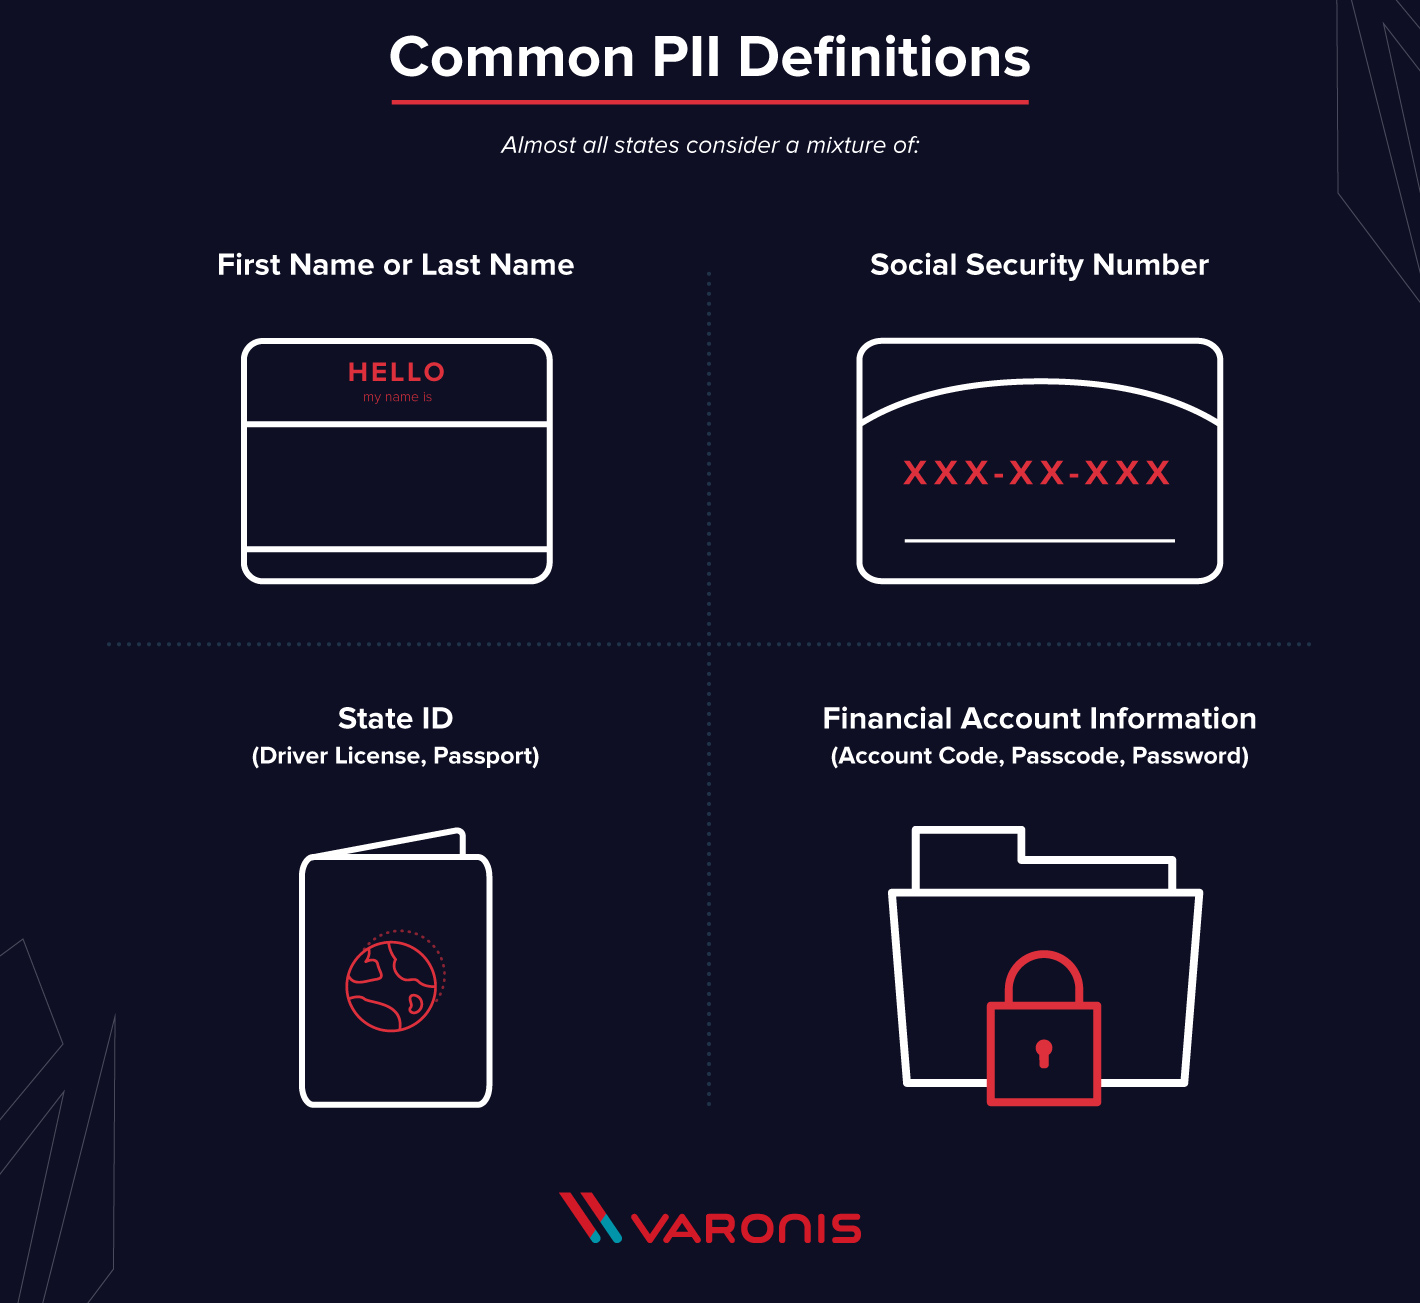 PII definitions